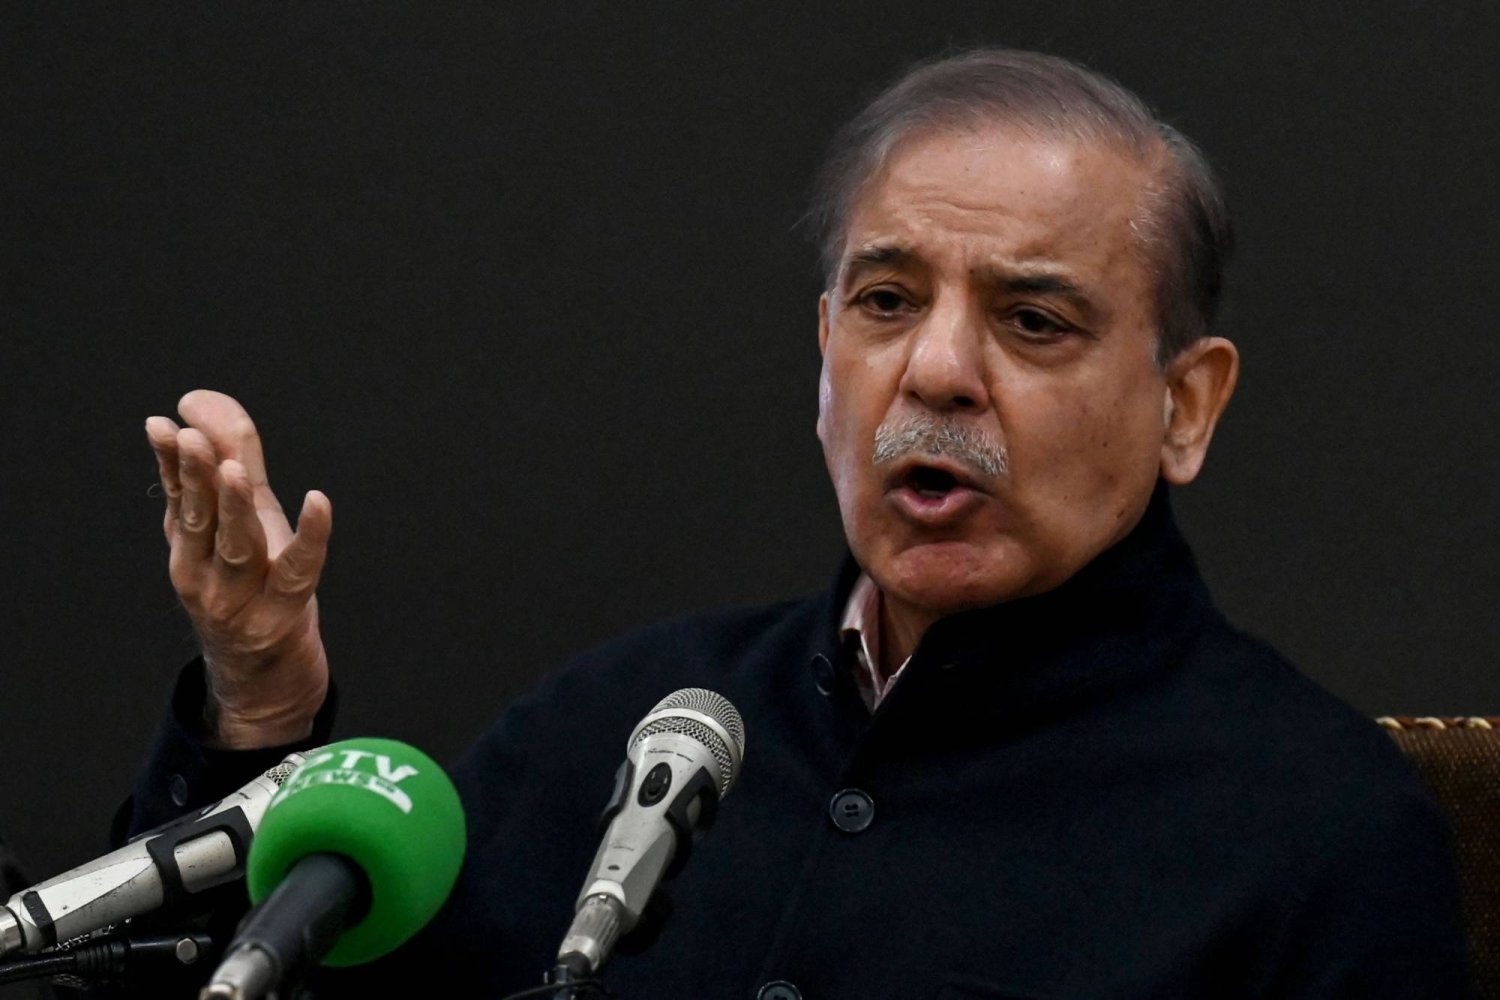  Pakistan's former Prime Minister and leader of the Pakistan Muslim League-Nawaz (PML-N) party Shehbaz Sharif speaks during a press conference in Lahore on February 13, 2024. (Photo by Arif ALI / AFP)